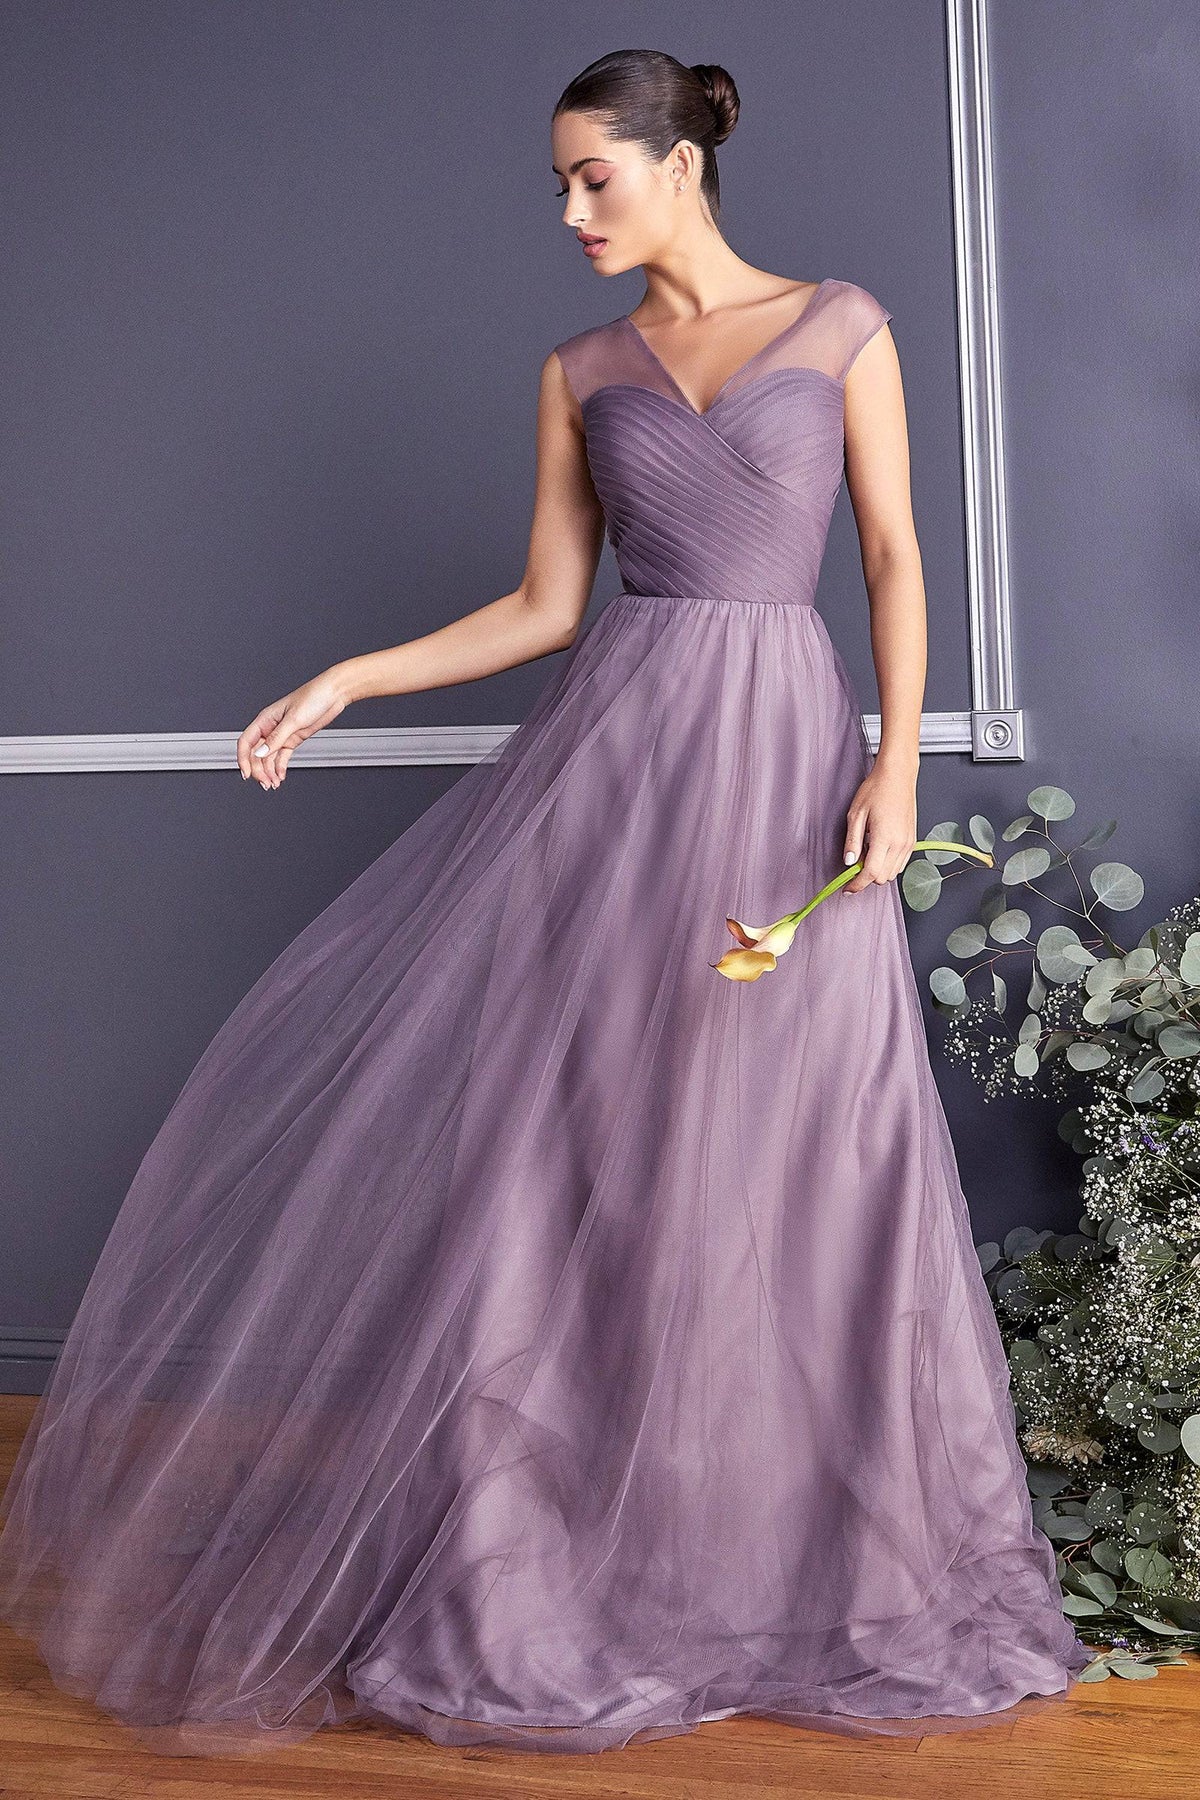 Stunning Layered Gown with V-Neckline and Long Skirt (SIZES 4-8) #CDET320 - NORMA REED